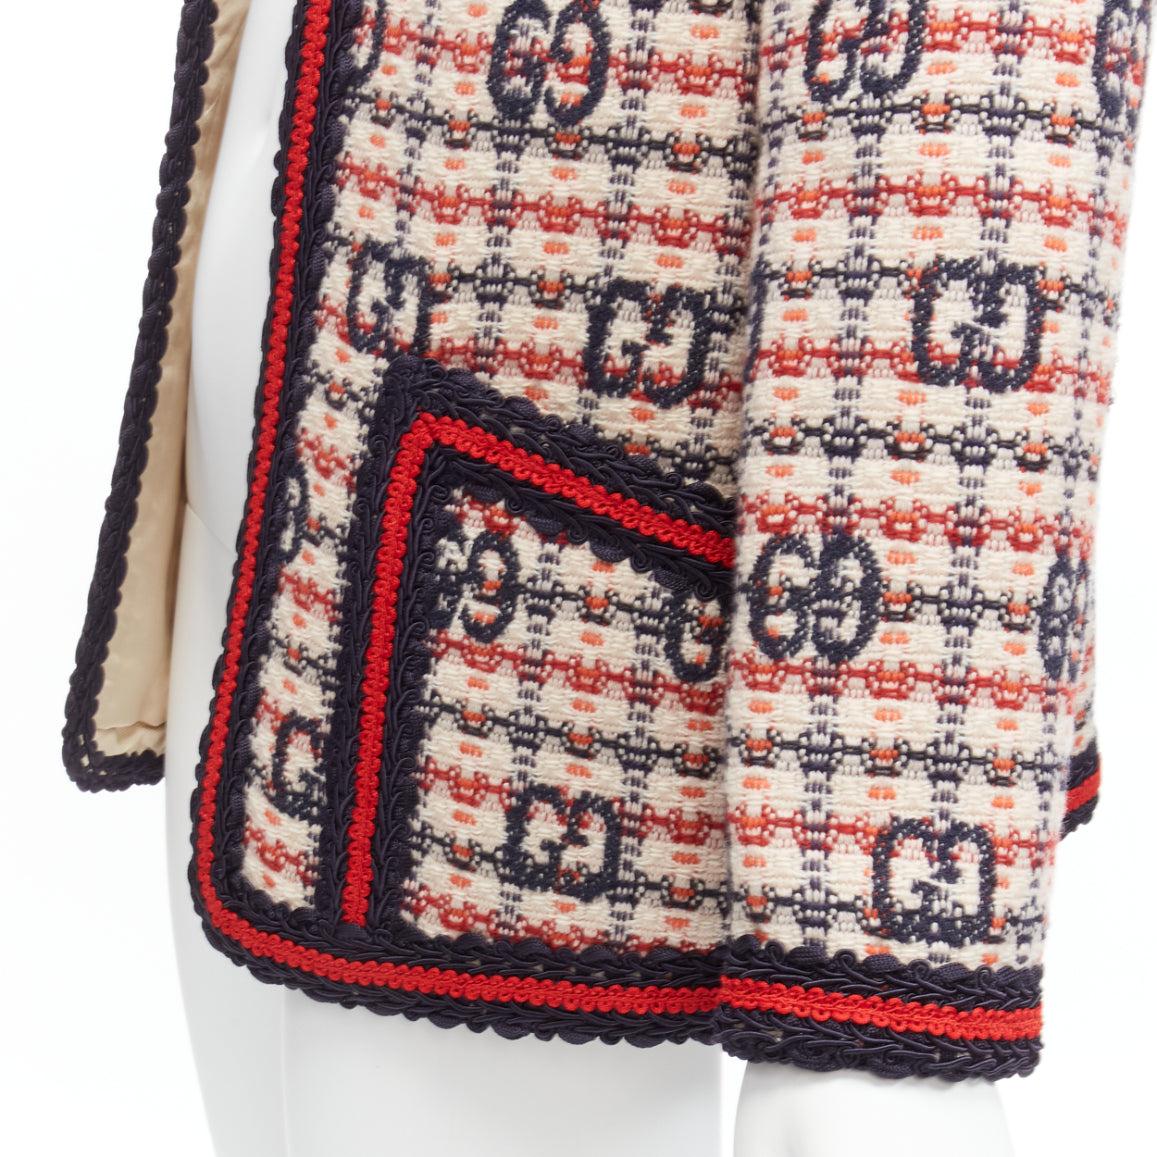 GUCCI Alessandro Michele 2020 beige GG logo red web trim tweed blazer IT40 S
Reference: TGAS/D00537
Brand: Gucci
Designer: Alessandro Michele
Collection: 2020
Material: Wool, Blend
Color: Beige, Red
Pattern: Monogram
Lining: Beige Fabric
Extra